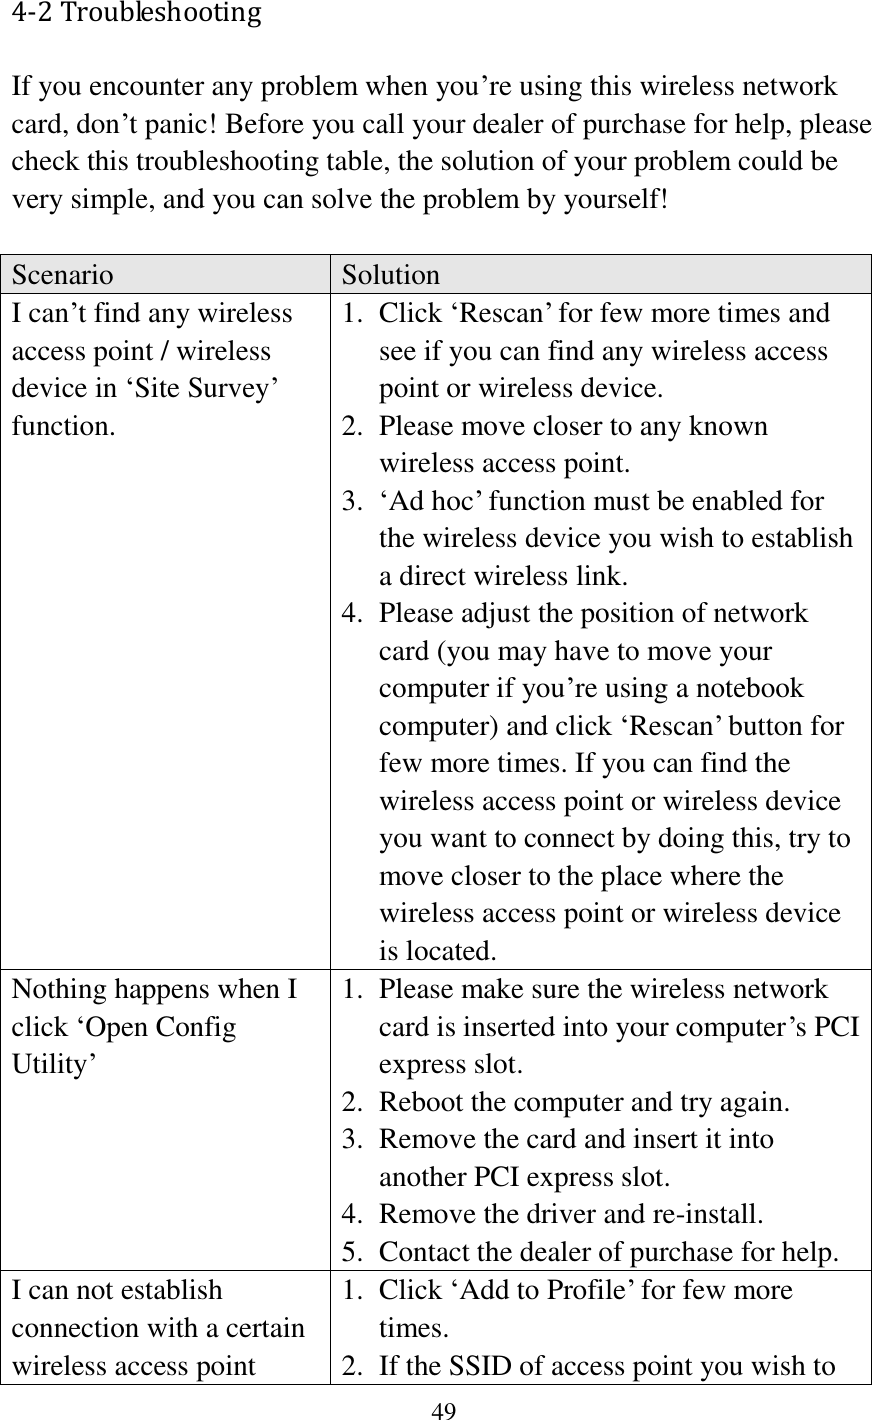 49  4-2 Troubleshooting If you encounter any problem when you’re using this wireless network card, don’t panic! Before you call your dealer of purchase for help, please check this troubleshooting table, the solution of your problem could be very simple, and you can solve the problem by yourself!  Scenario Solution I can’t find any wireless access point / wireless device in ‘Site Survey’ function. 1. Click ‘Rescan’ for few more times and see if you can find any wireless access point or wireless device. 2. Please move closer to any known wireless access point. 3. ‘Ad hoc’ function must be enabled for the wireless device you wish to establish a direct wireless link. 4. Please adjust the position of network card (you may have to move your computer if you’re using a notebook computer) and click ‘Rescan’ button for few more times. If you can find the wireless access point or wireless device you want to connect by doing this, try to move closer to the place where the wireless access point or wireless device is located. Nothing happens when I click ‘Open Config Utility’ 1. Please make sure the wireless network card is inserted into your computer’s PCI express slot. 2. Reboot the computer and try again. 3. Remove the card and insert it into another PCI express slot. 4. Remove the driver and re-install. 5. Contact the dealer of purchase for help. I can not establish connection with a certain wireless access point 1. Click ‘Add to Profile’ for few more times. 2. If the SSID of access point you wish to 